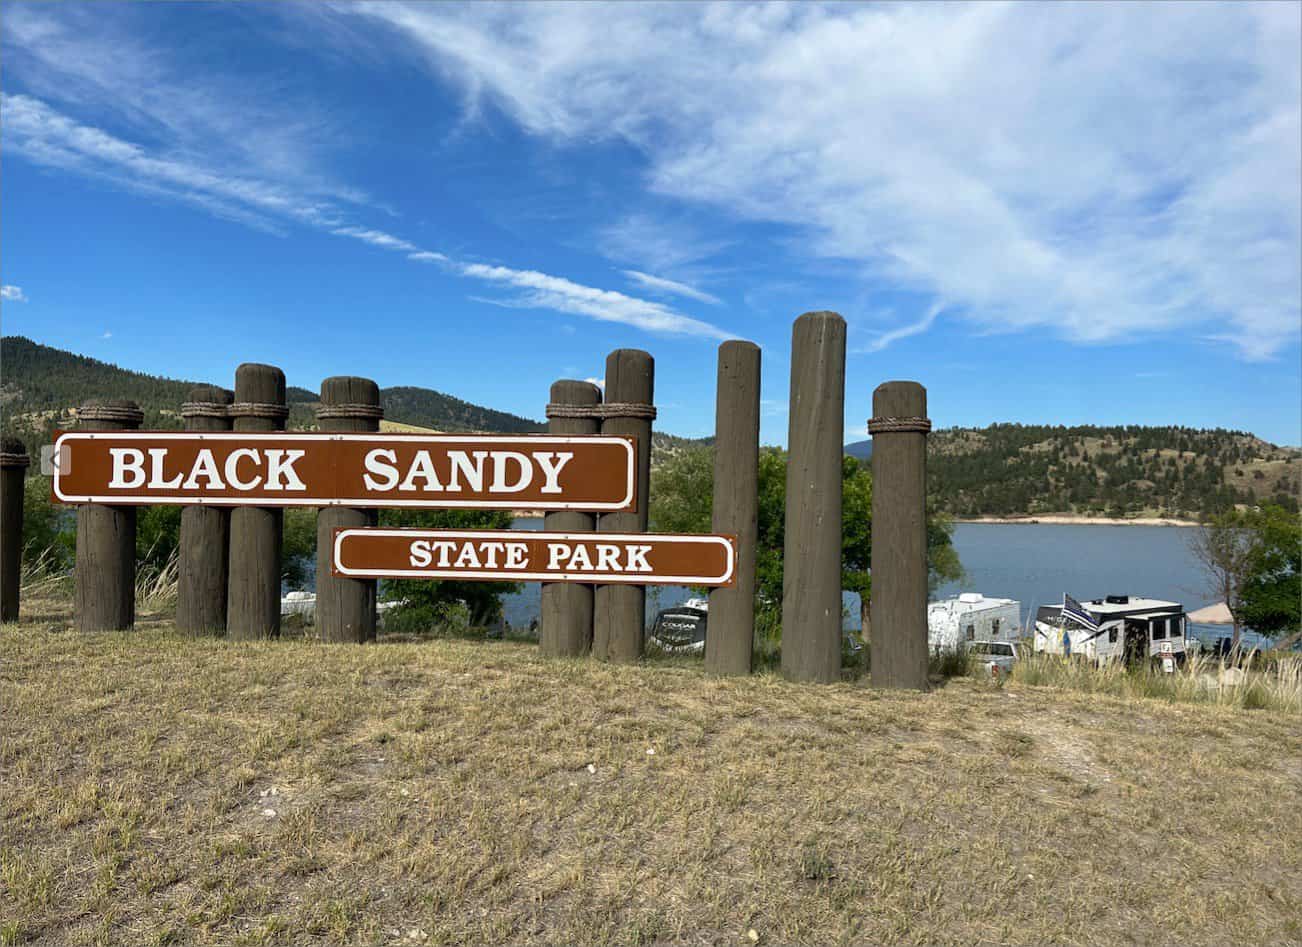 Entrance sign to Black Sandy State Park with a view of the lake and surrounding landscape in the background.